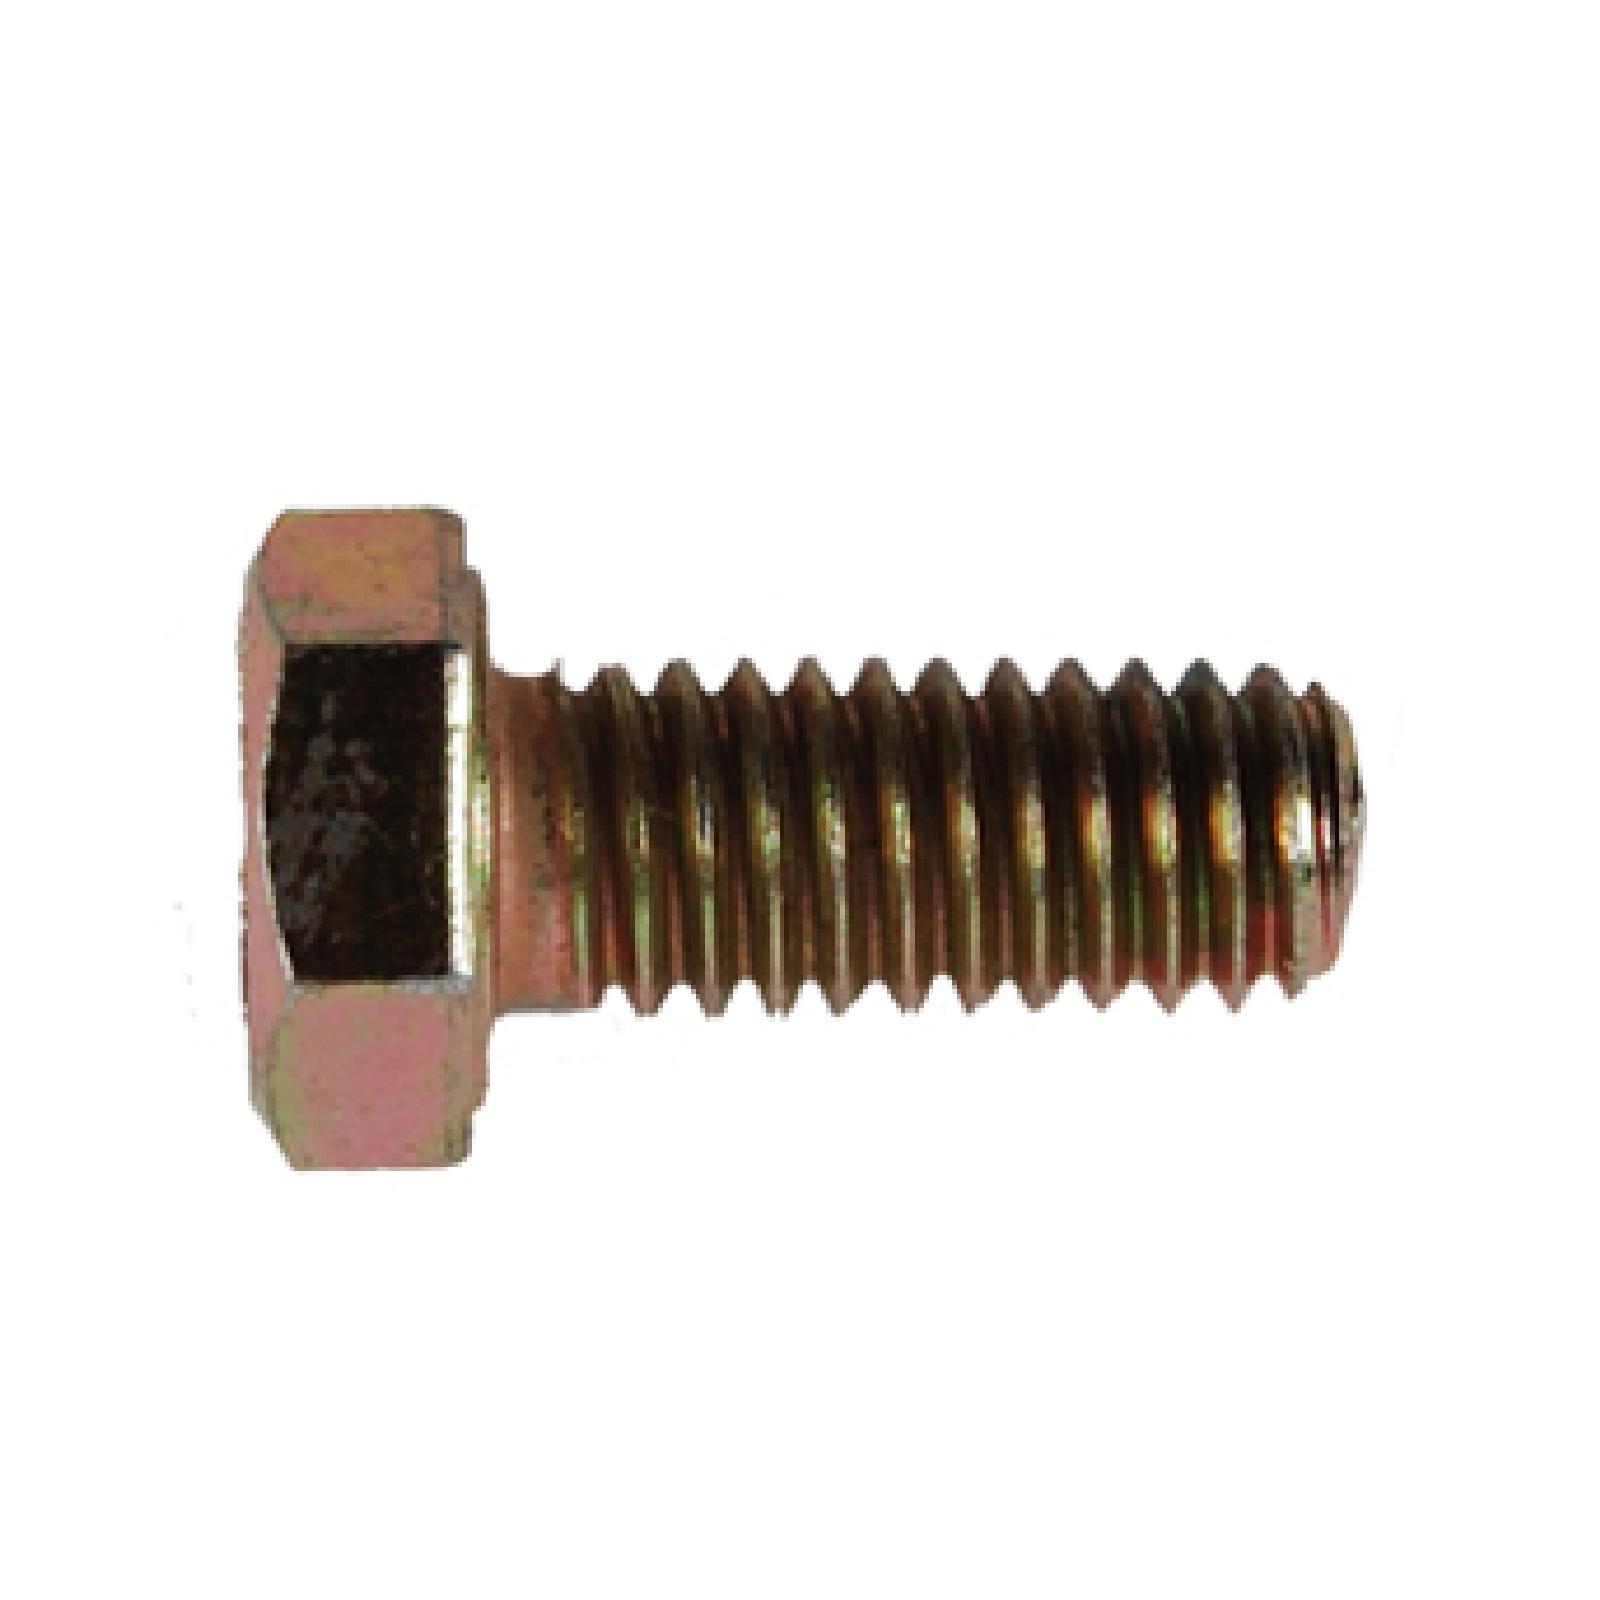 SCREW HEX 5/16 X 3 part# 7103008 by MTD - Click Image to Close